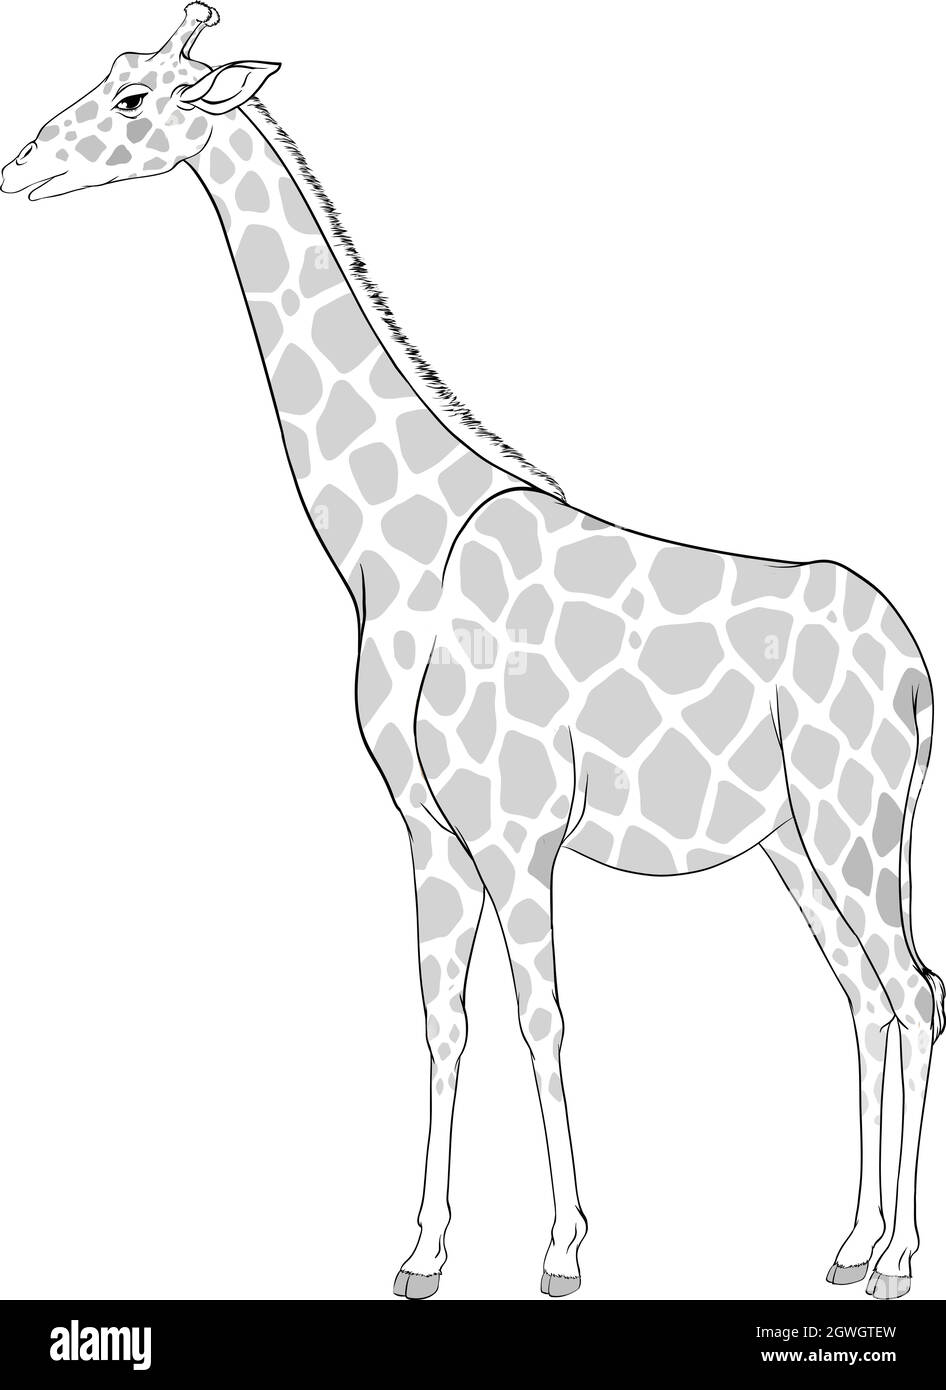 Giraffe Sketch Stock Photos and Images - 123RF-anthinhphatland.vn